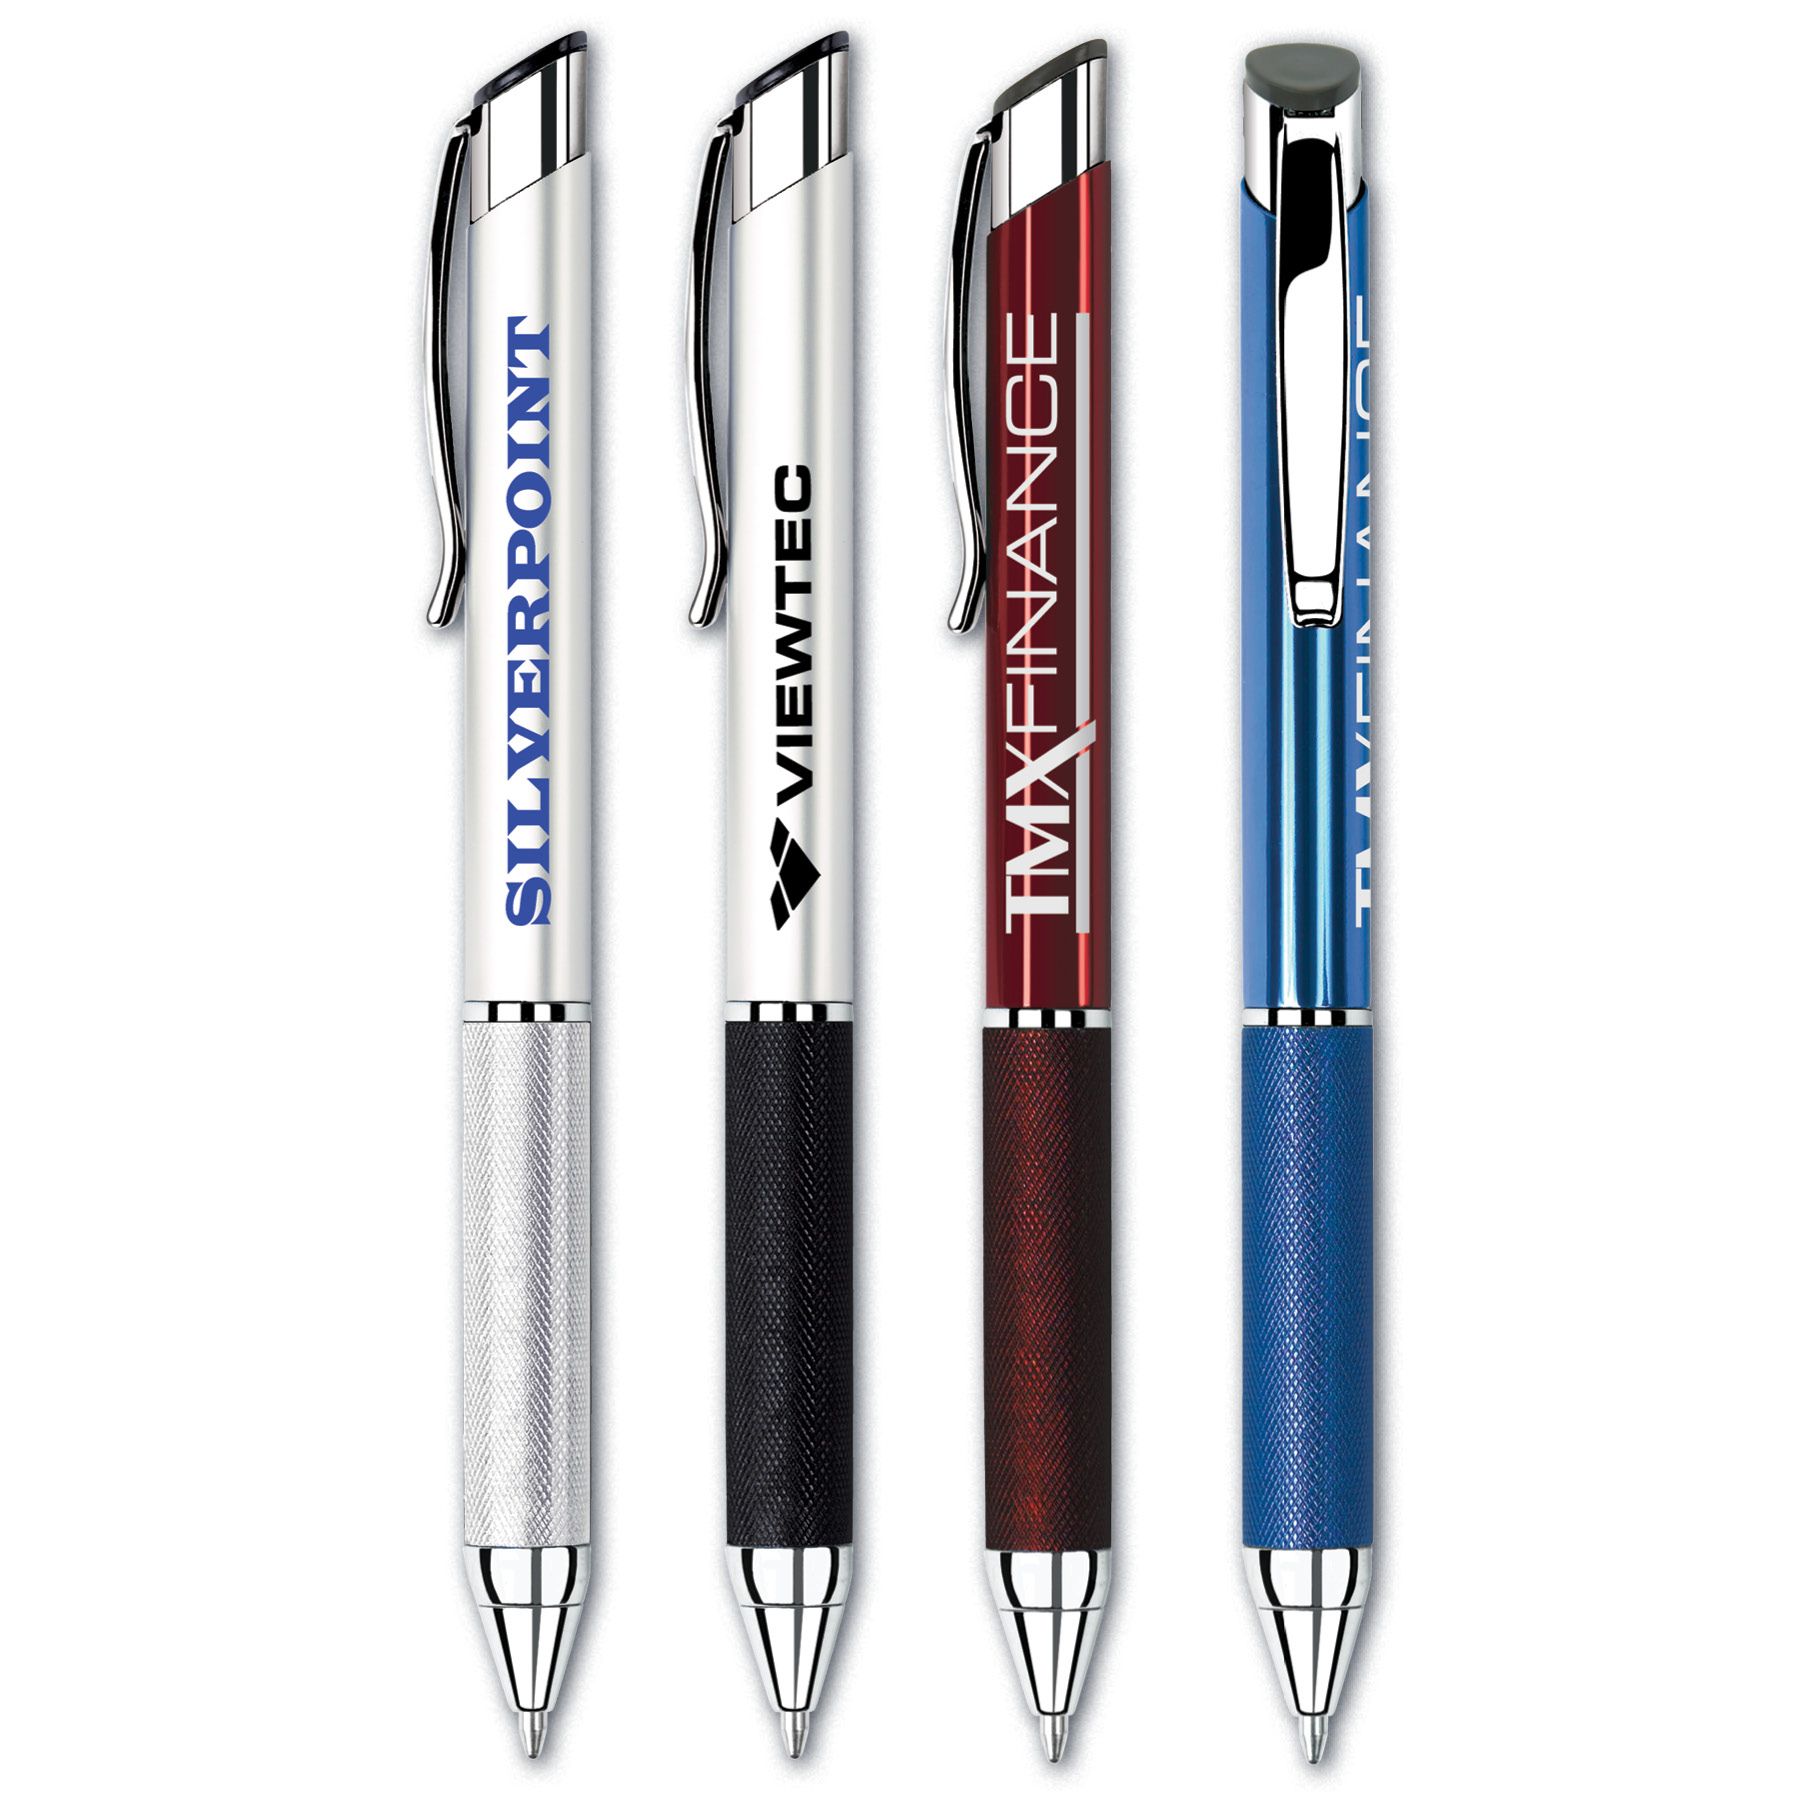 Triton Aluminum 3-sided Click-Action Ballpoint Triangle Pen With Metal Grip